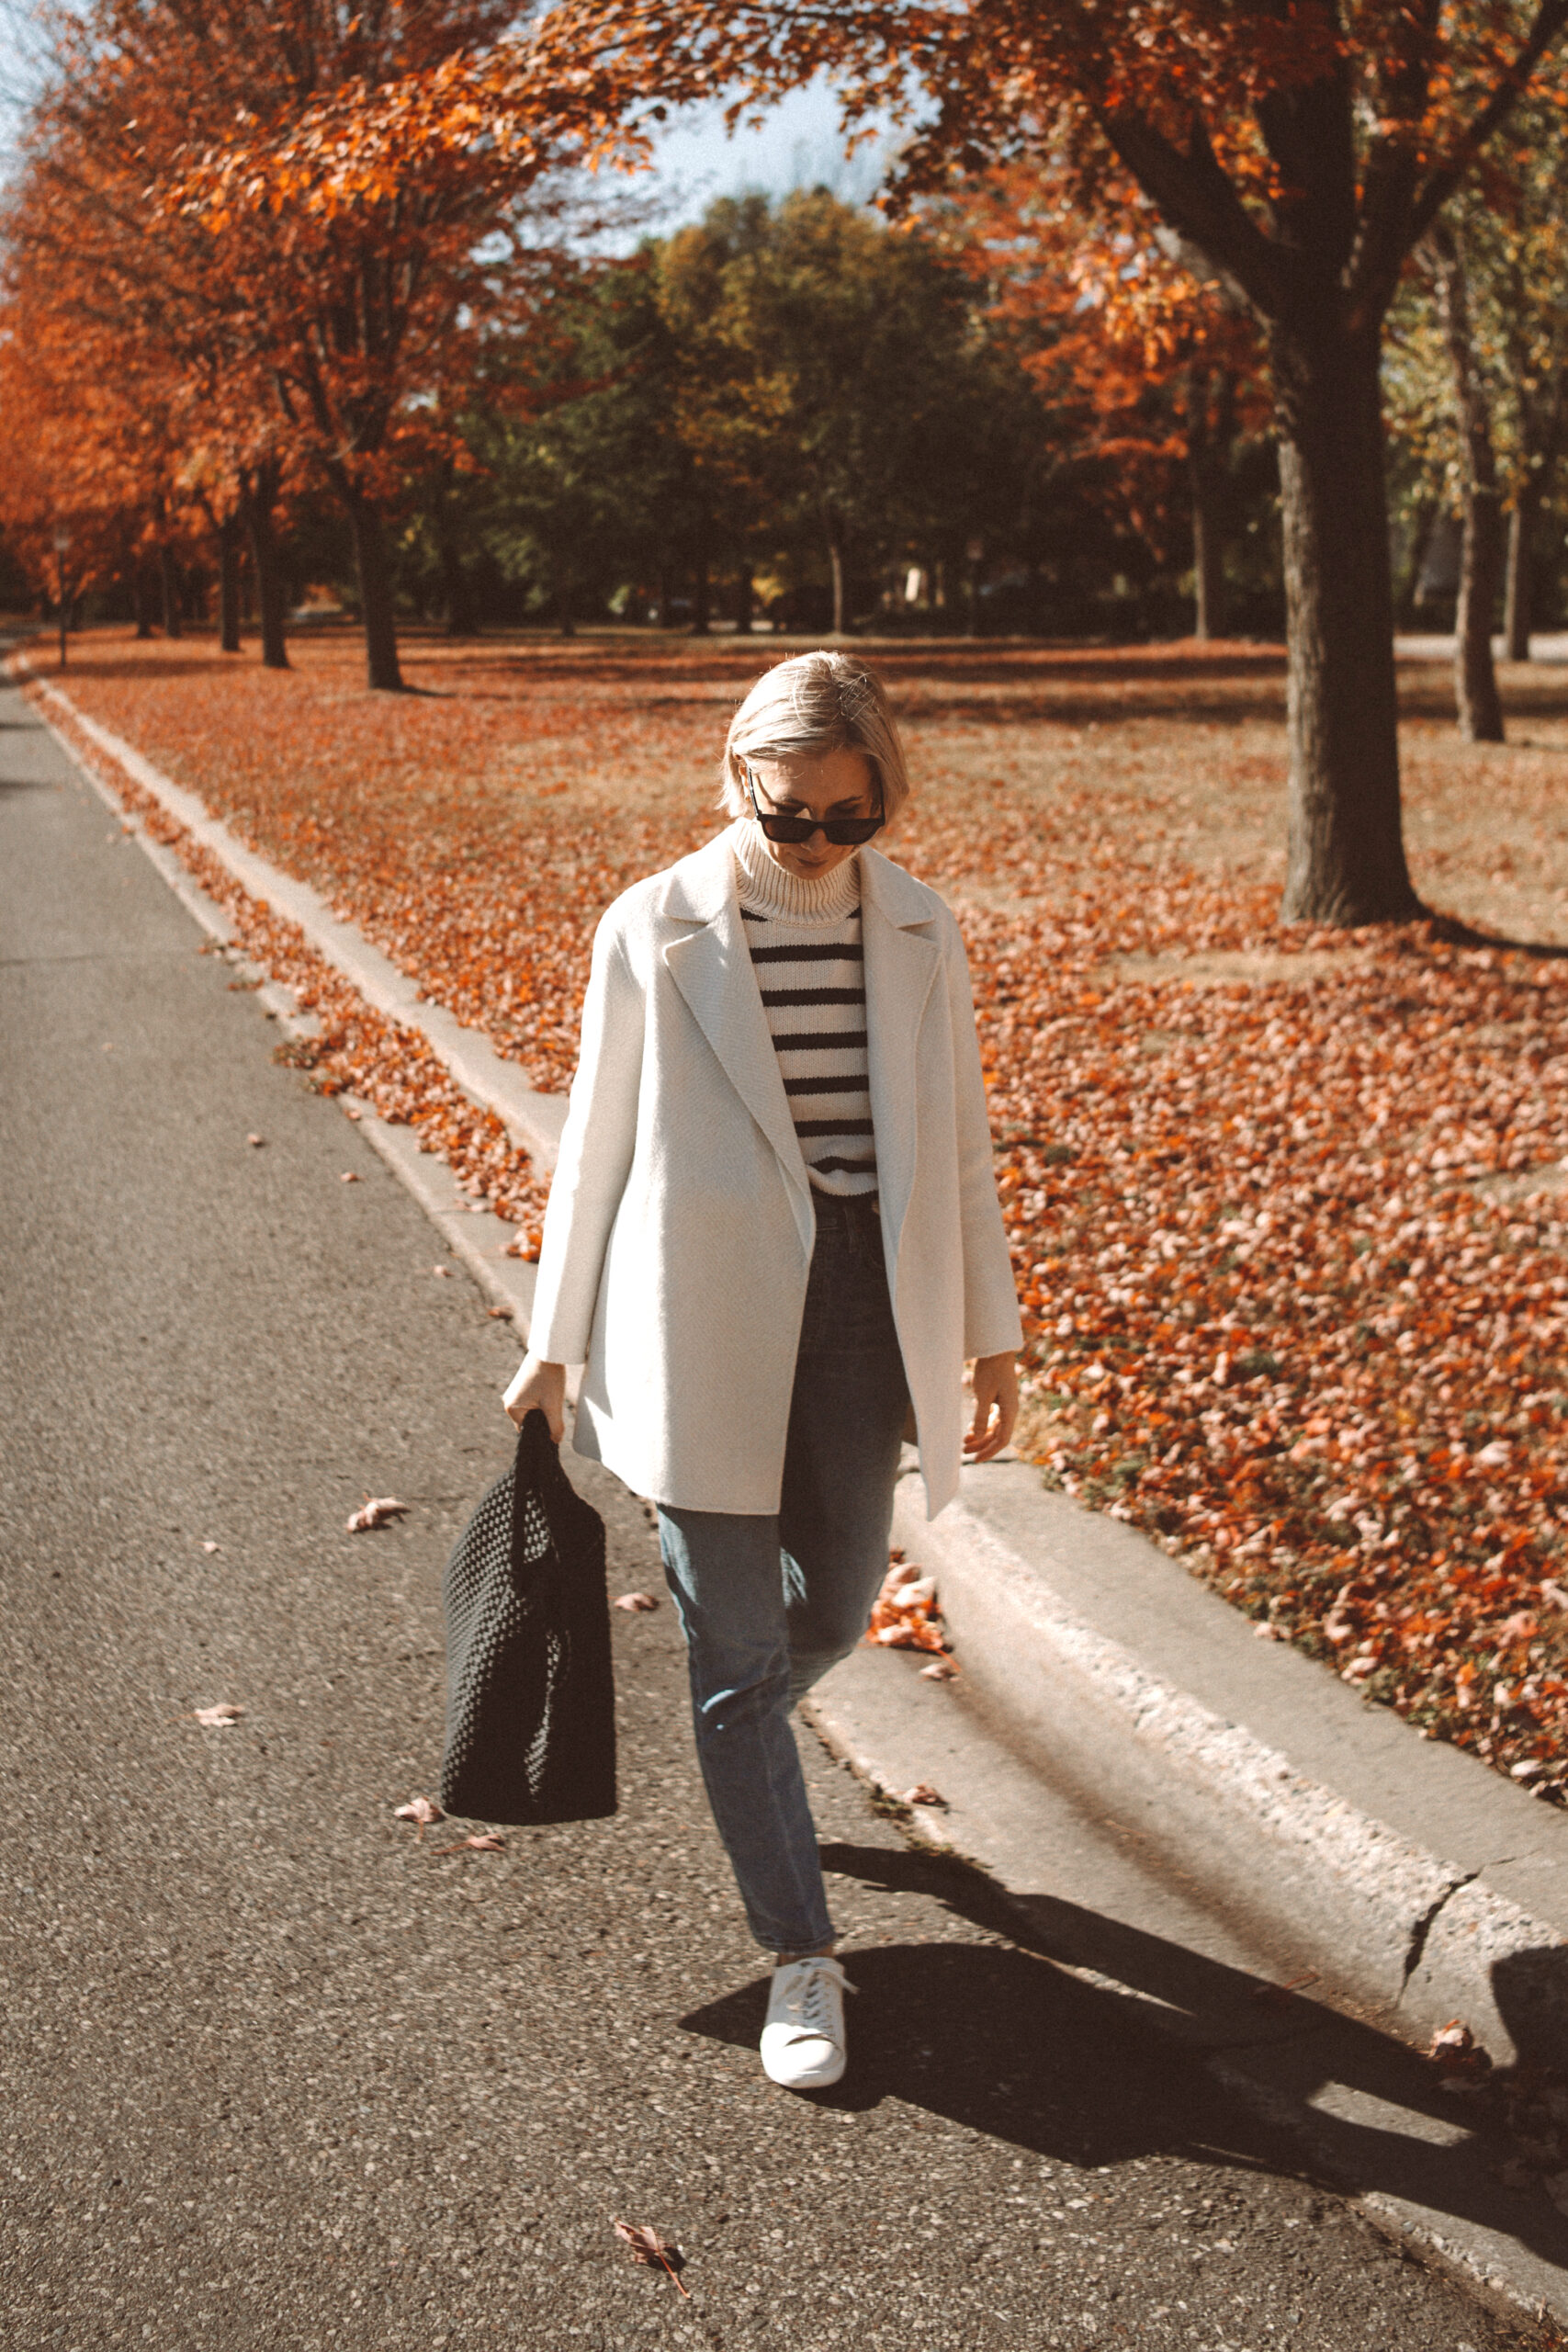 Karin Emily wears the Theory Clairene Jacket, a striped turtleneck sweater, citizens of humanity jolene jeans, sezane sneakers, and naghedi st barths large onyx bag while standing in front of a yard full of all leaves